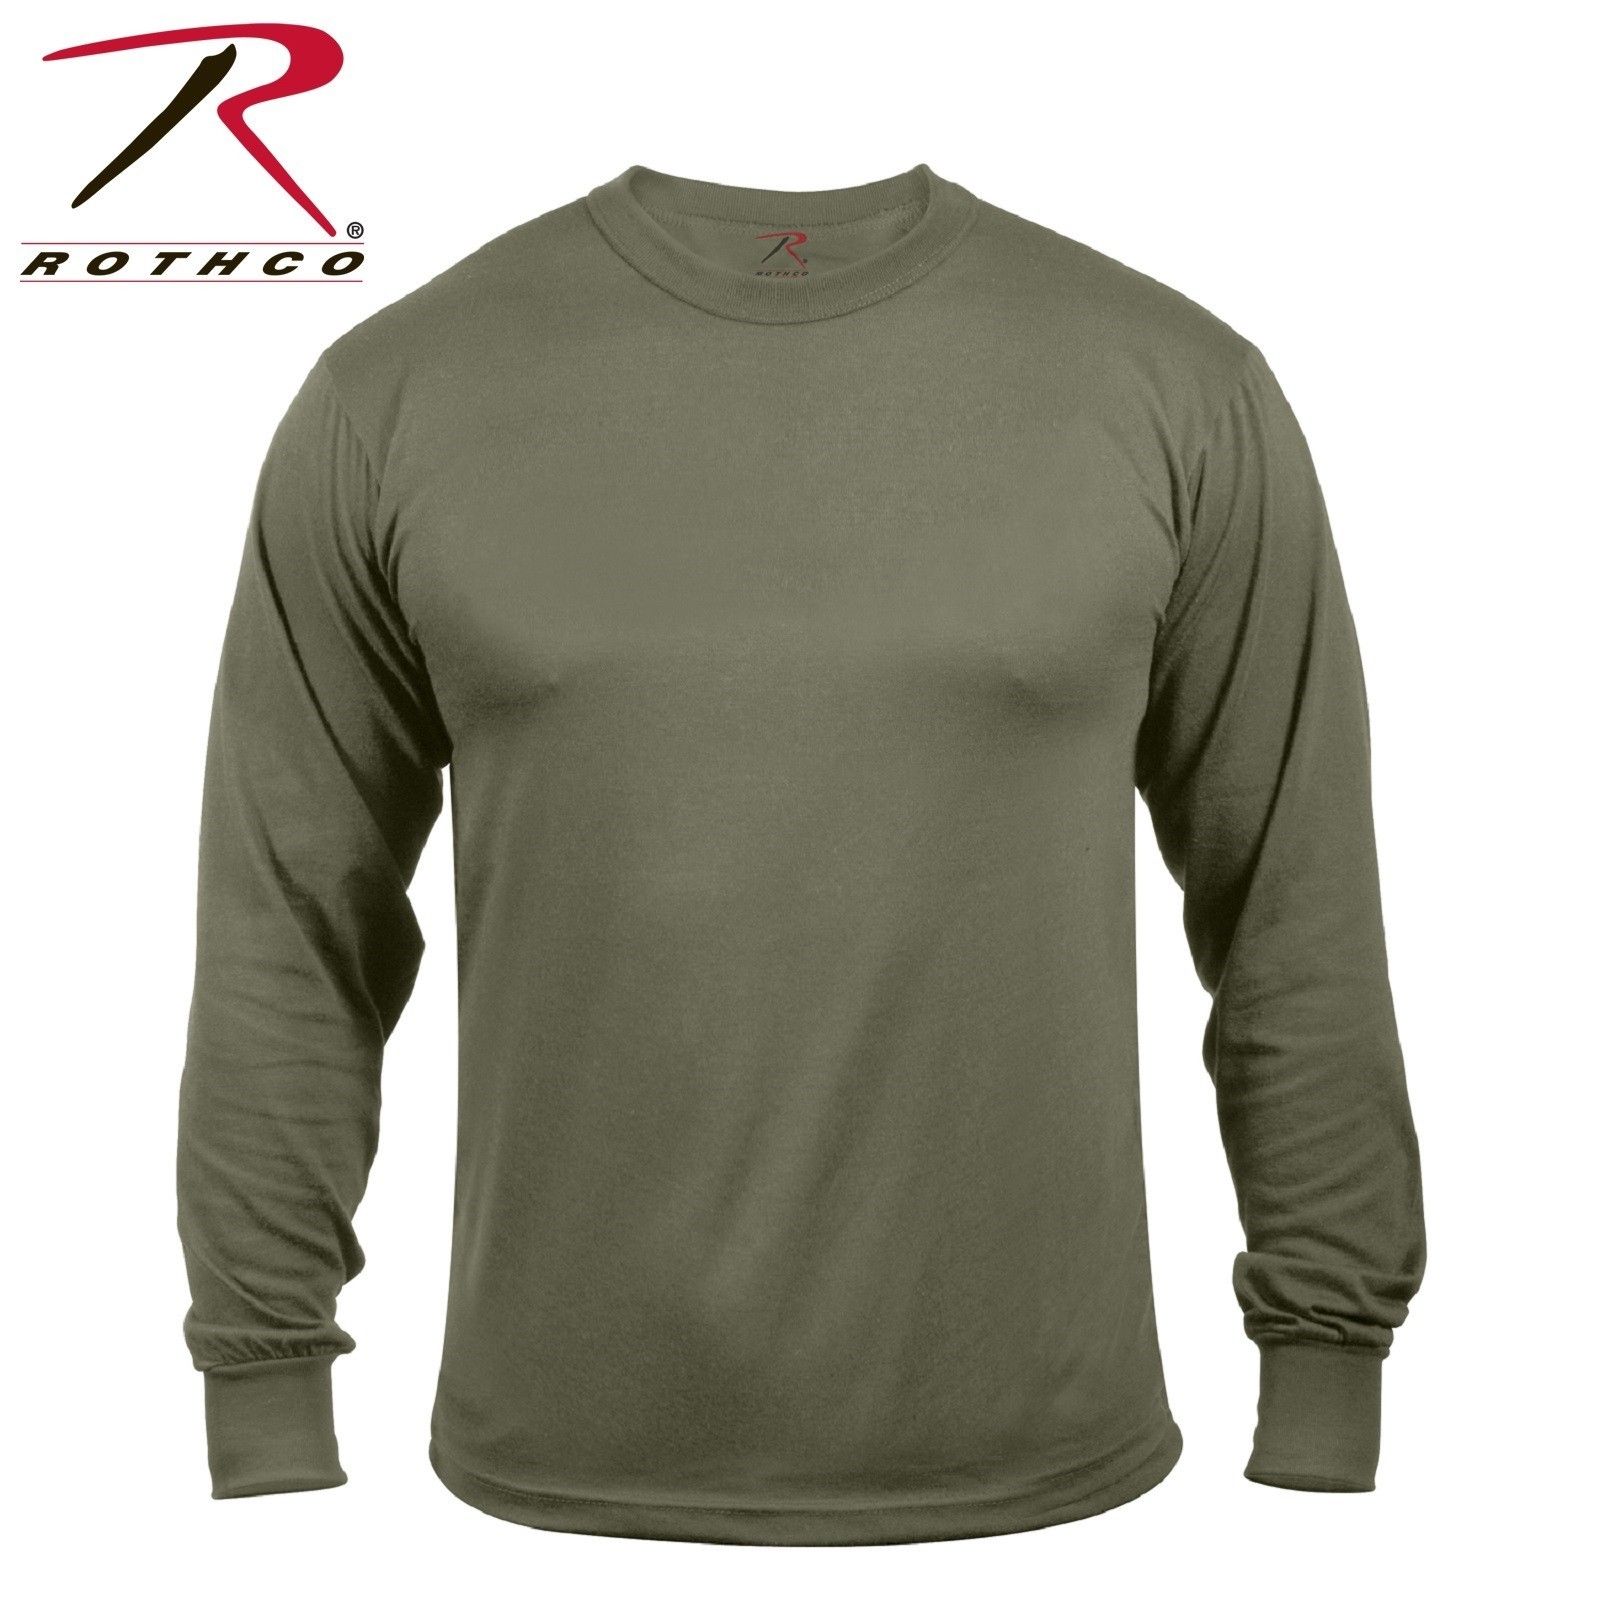 Rothco Moisture Wicking Long Sleeve T-Shirt - Mens 100% Polyester Olive  Drab Tee